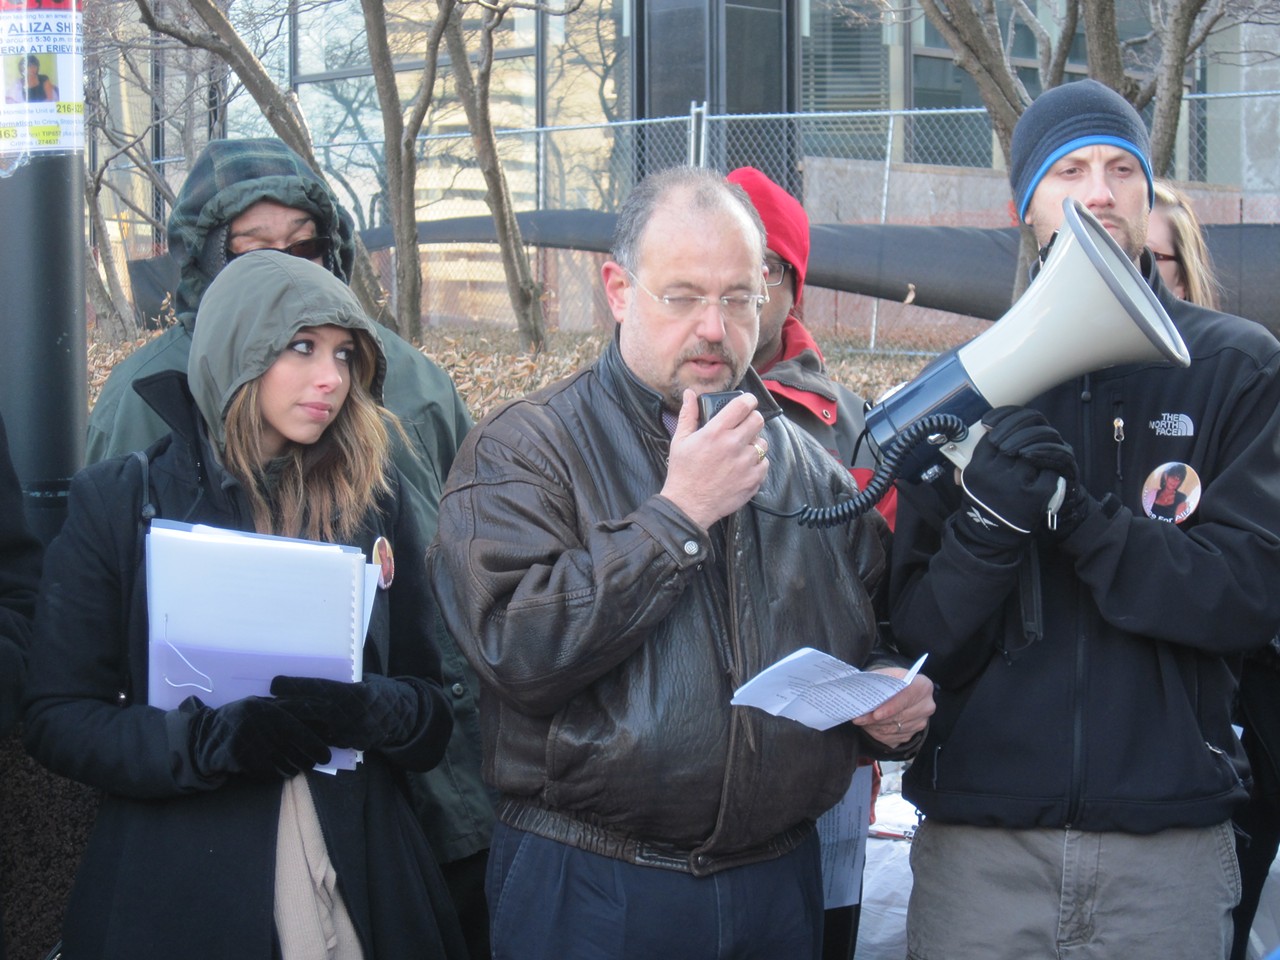 Edward Czinn, Aliza's brother, speaks during the rally.